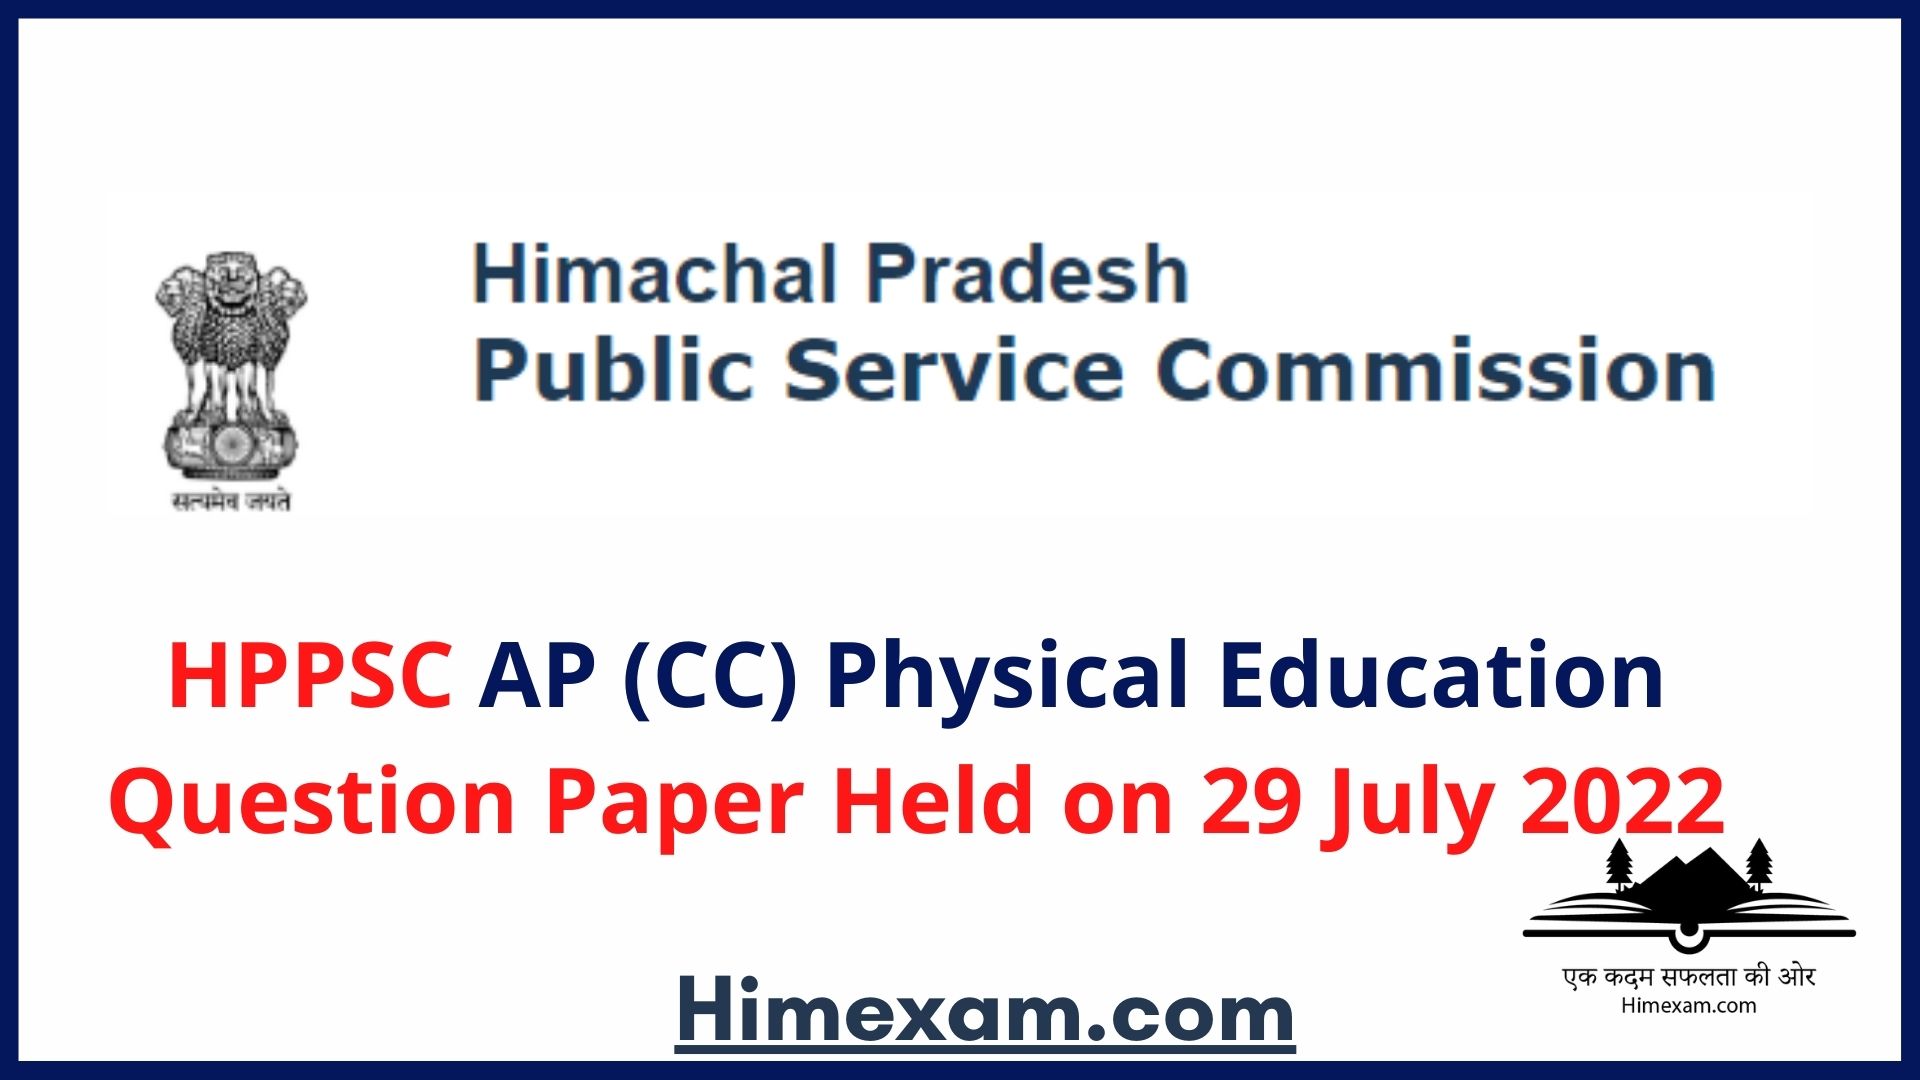 HPPSC AP (CC) Physical Education Question Paper Held on 29 July 2022